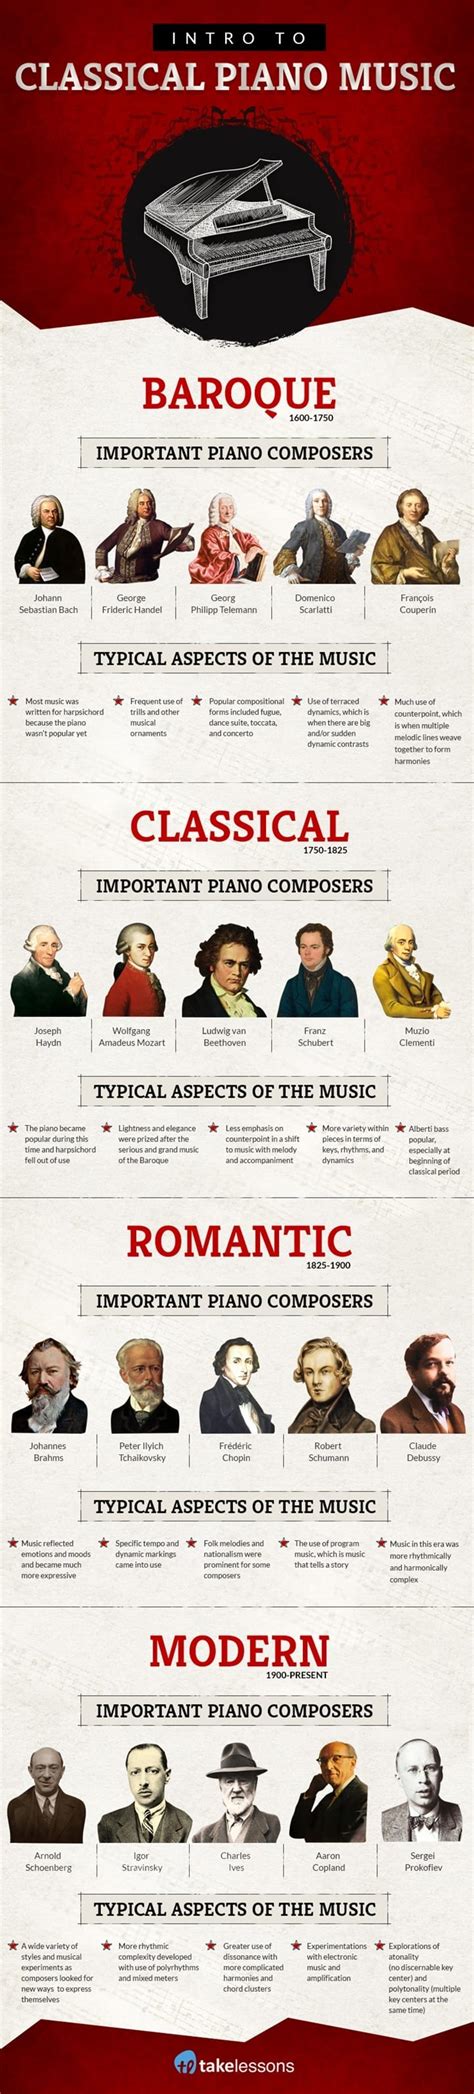 This period also saw the development of the concerto, symphony, sonata, trio, and quartet. A Cool Classical Music History Infographic | Music Matters Blog